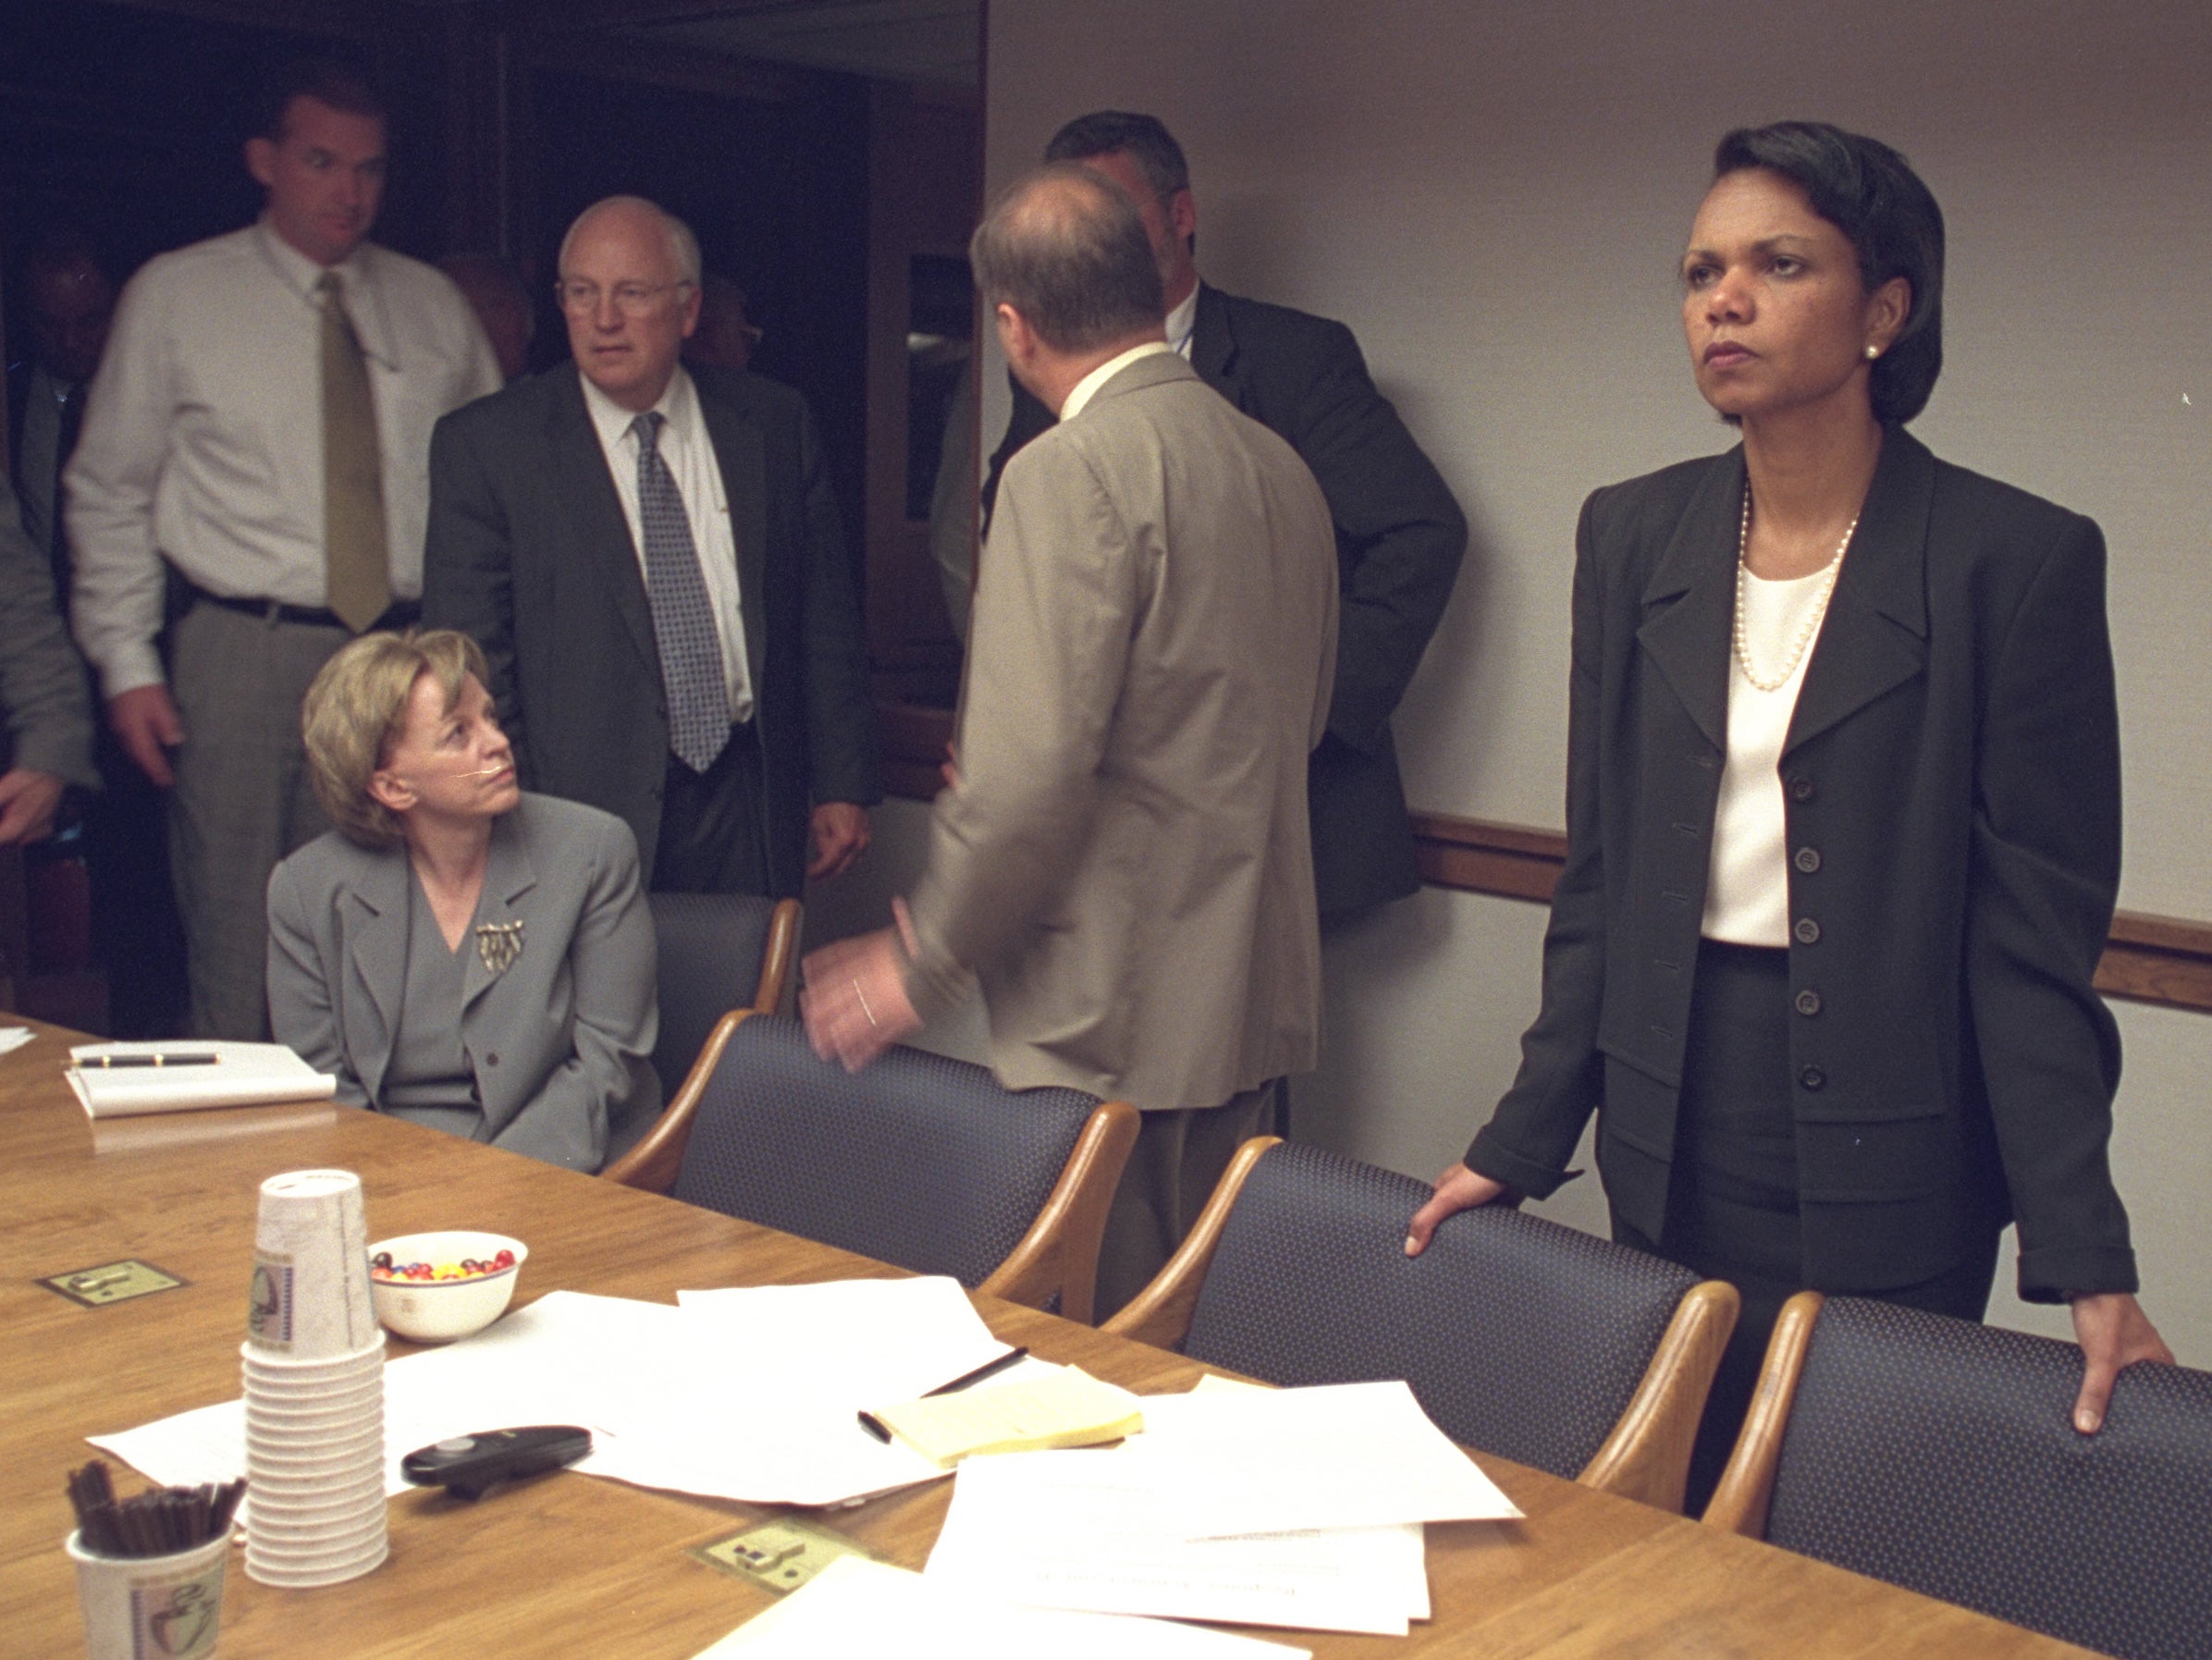 Condoleezza Rice photographed with the Cheneys and senior staff